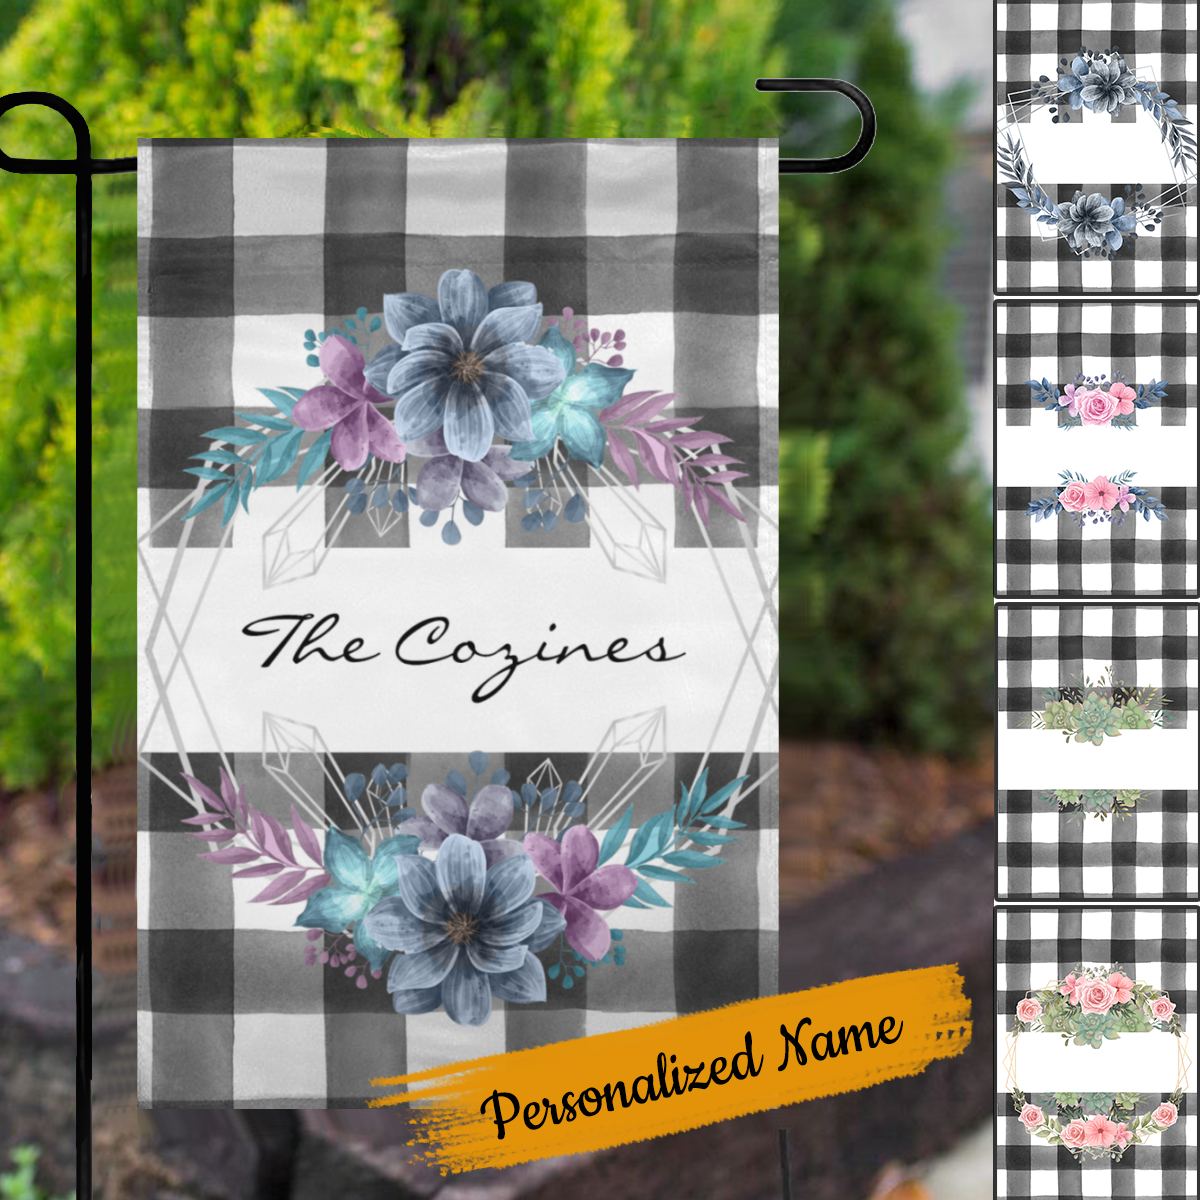 Personalized Name Flower Welcome Garden Flags Yard Decor Flags